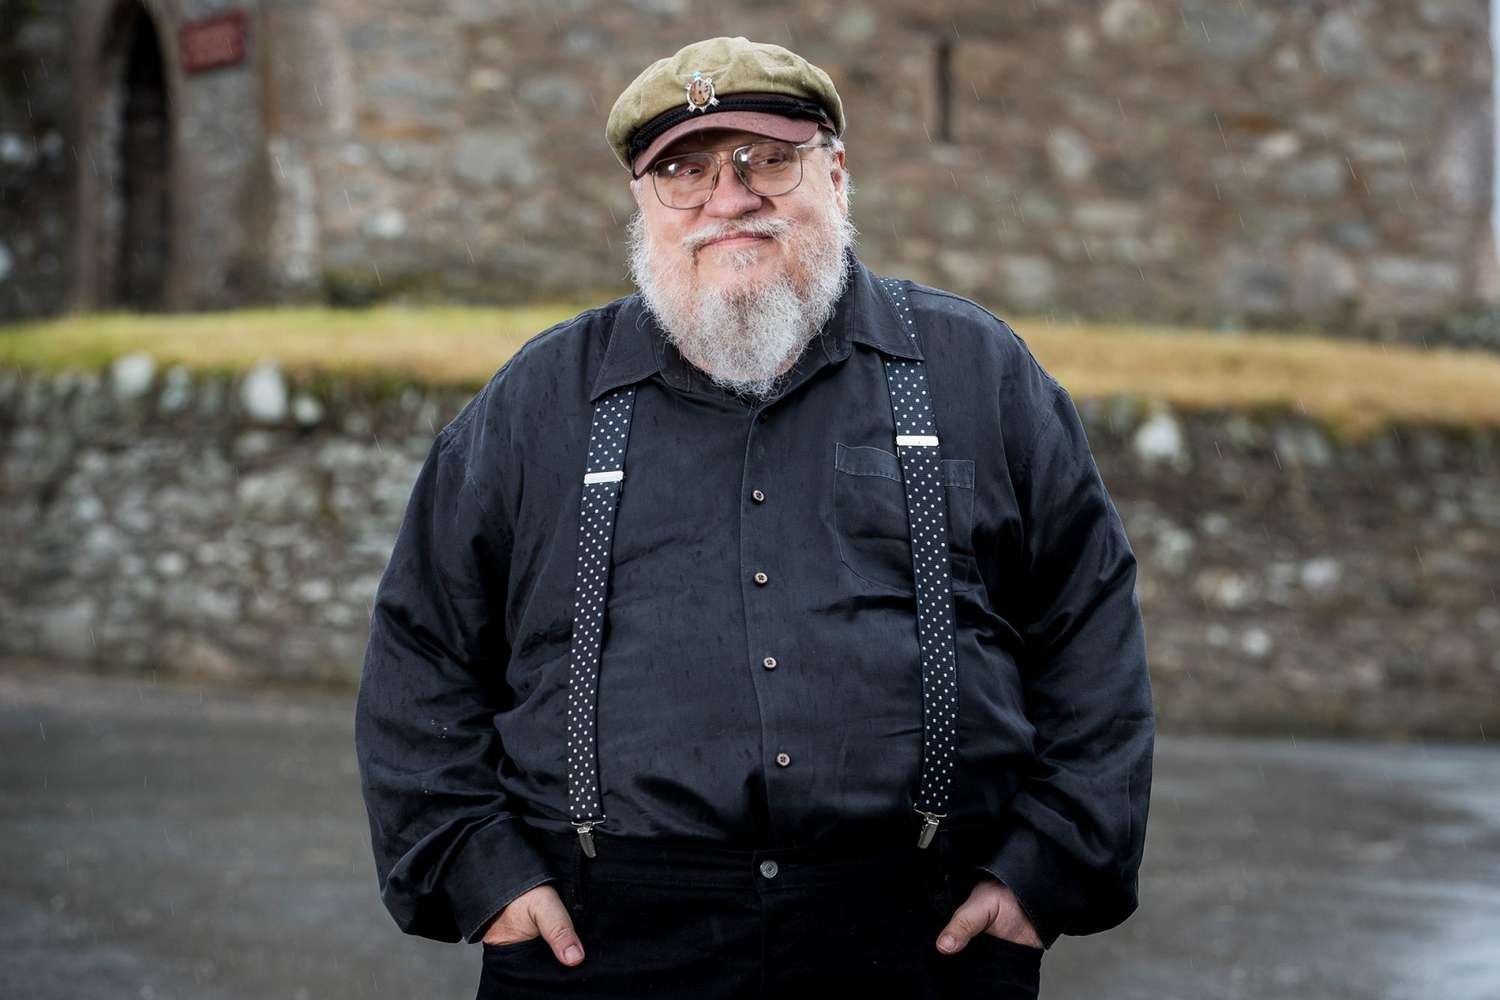 George R.R. Martin posing for the camera after bagging a lucrative deal with HBO